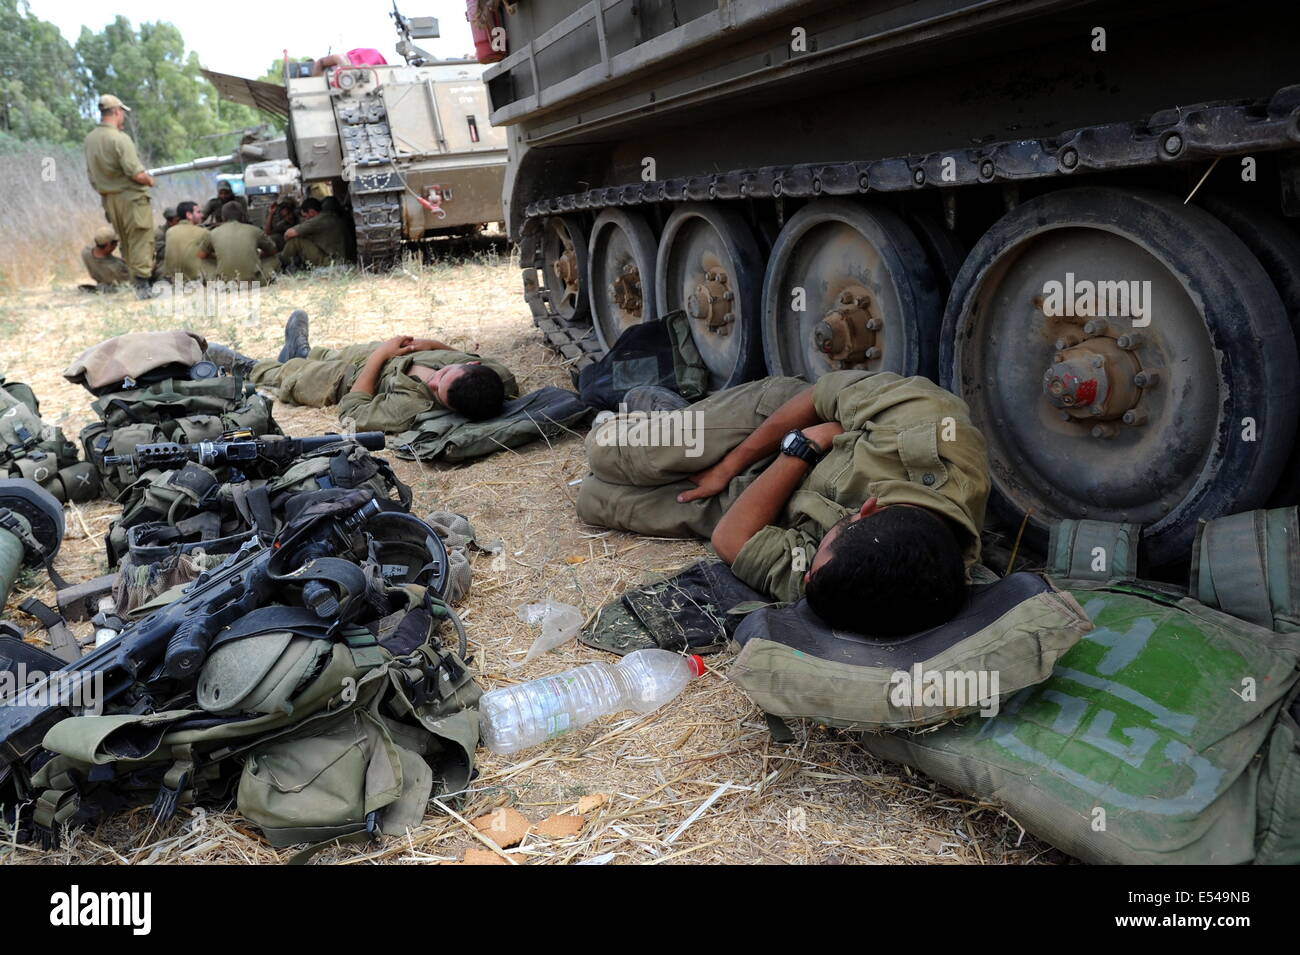 Unspecified, Israel. 19th July, 2014.  Israeli soldiers sleep next to an APC in an army deployment area near Israel's border with the Gaza Strip, on July 19, 2014, on the second day of Israeli ground invasion into Gaza Strip in order to destroy terror tunnels infrastructure. Credit:  Gili Yaari/NurPhoto/ZUMA Wire/Alamy Live News Stock Photo